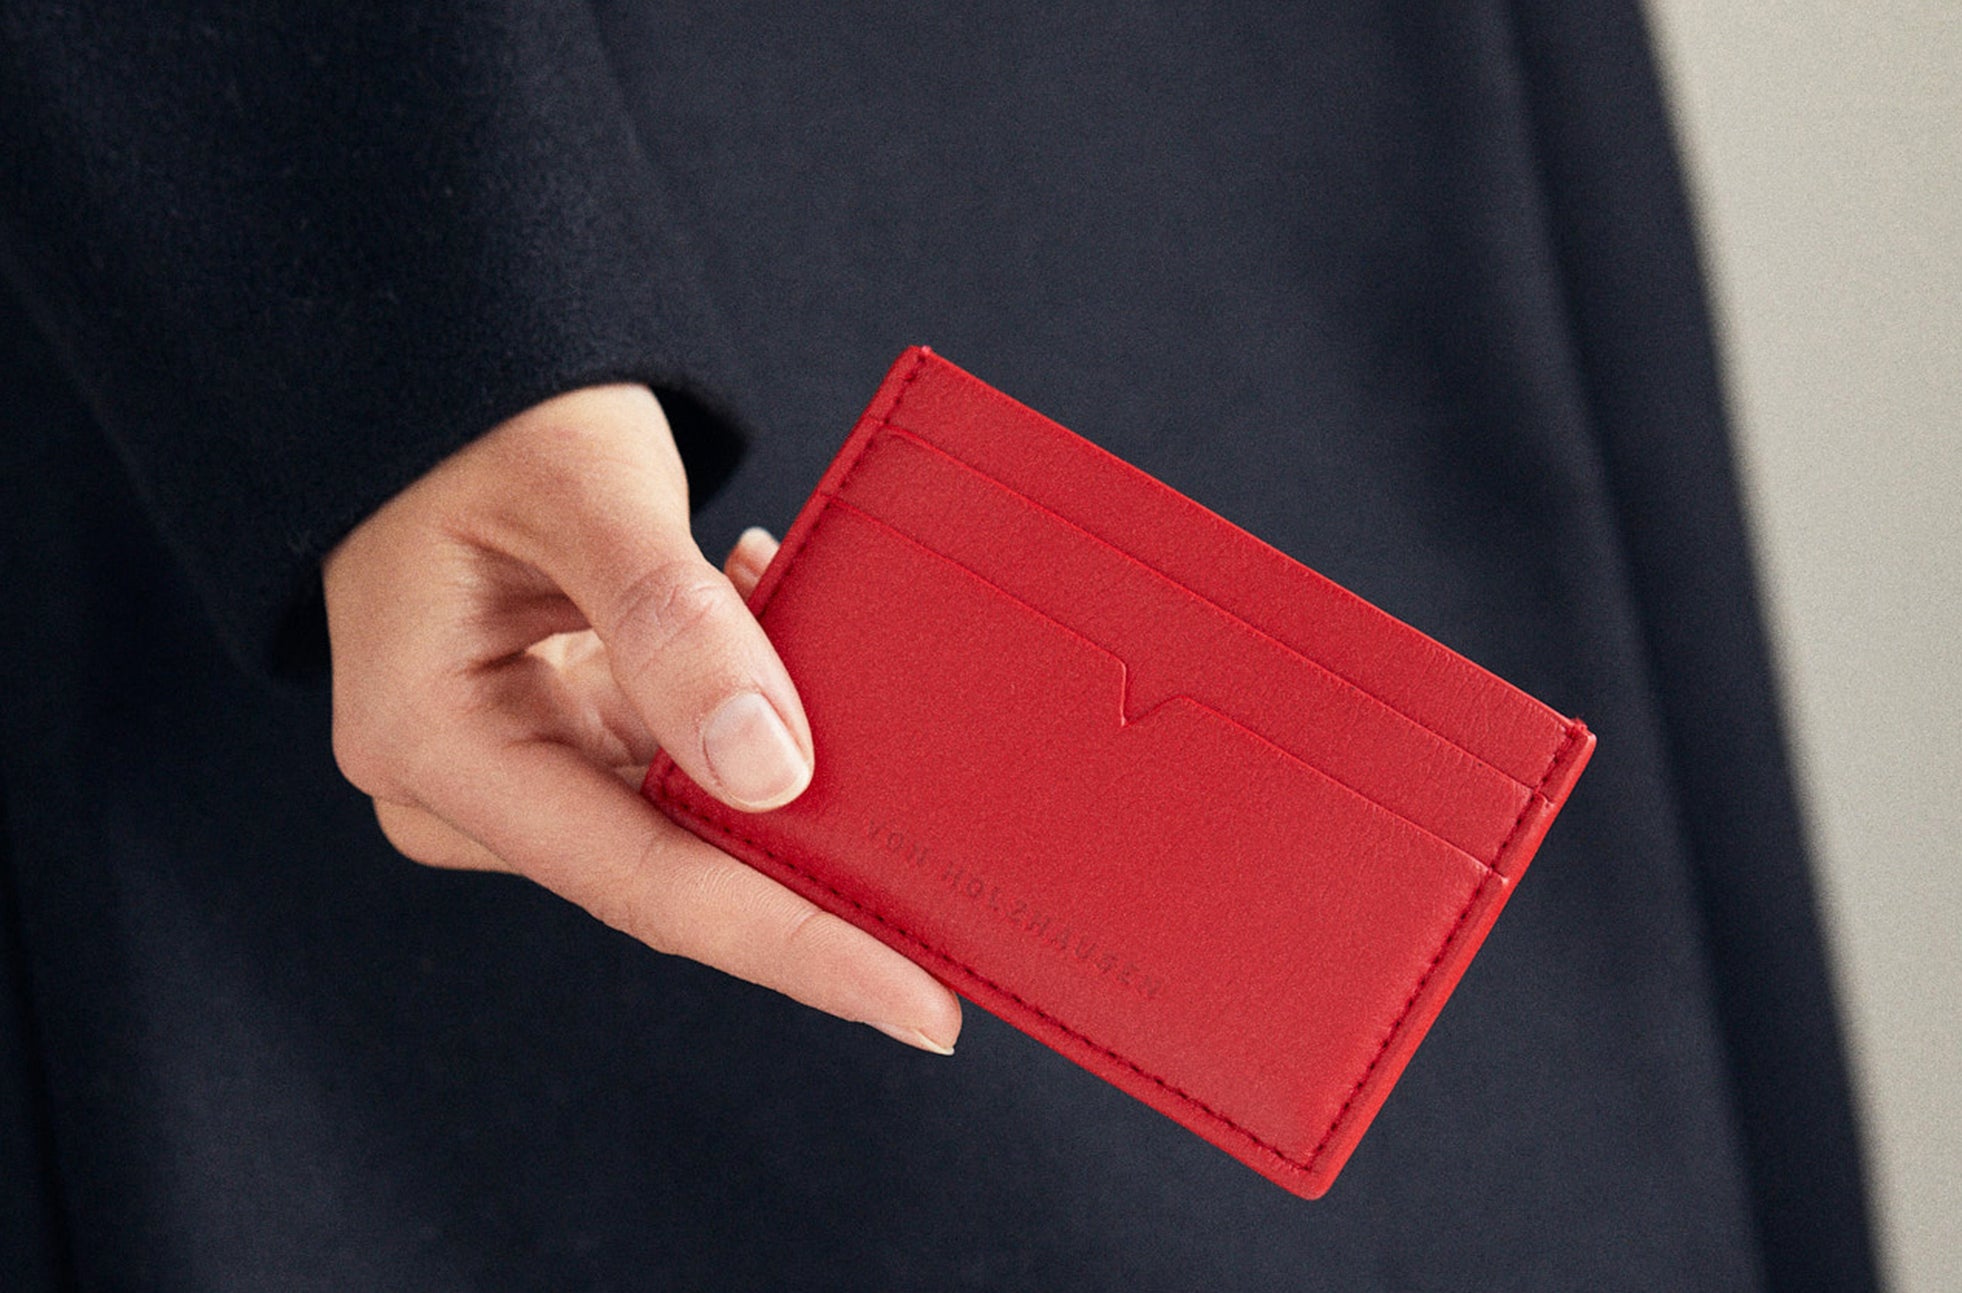 The Credit Card Holder in Technik in Cherry image 